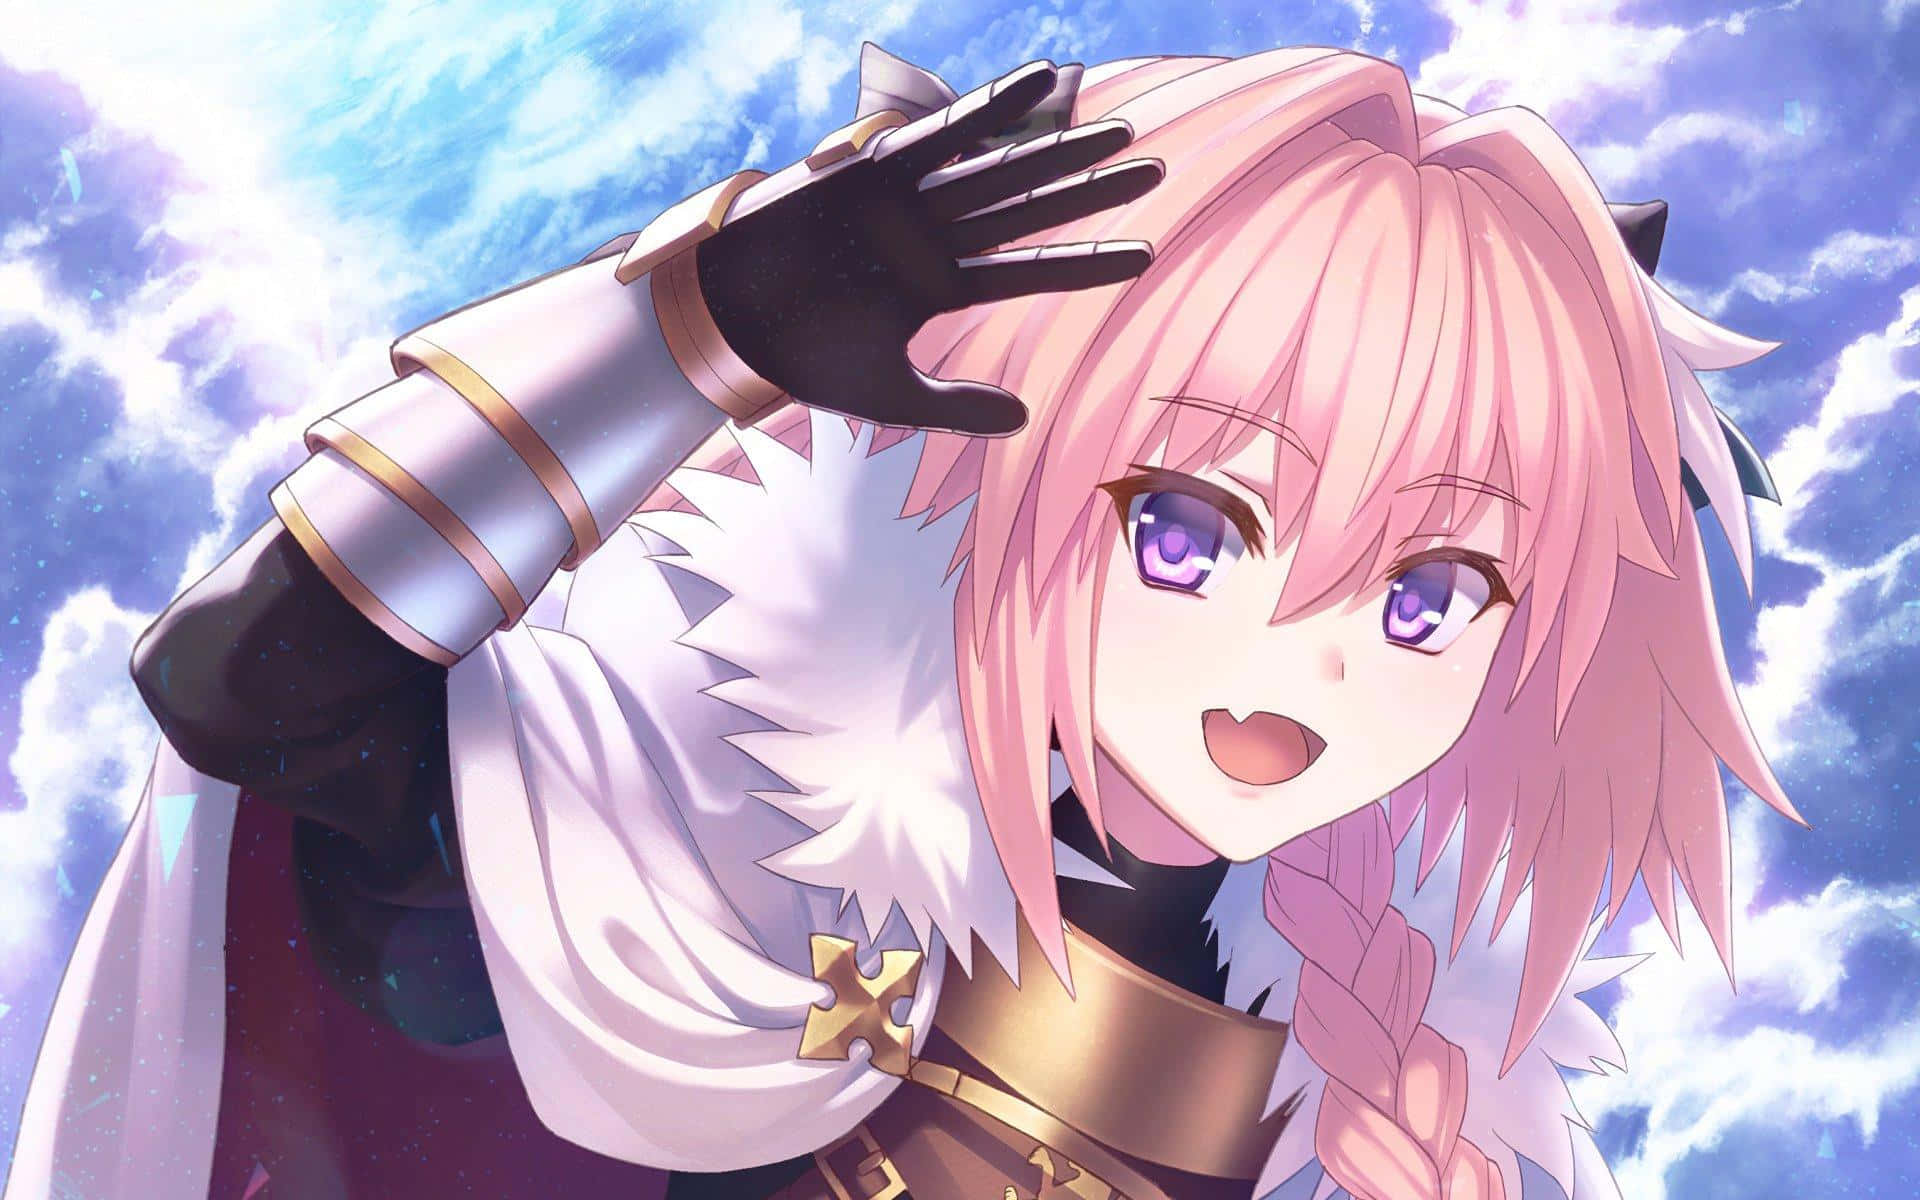 Feel the power of Astolfo's magic and courage